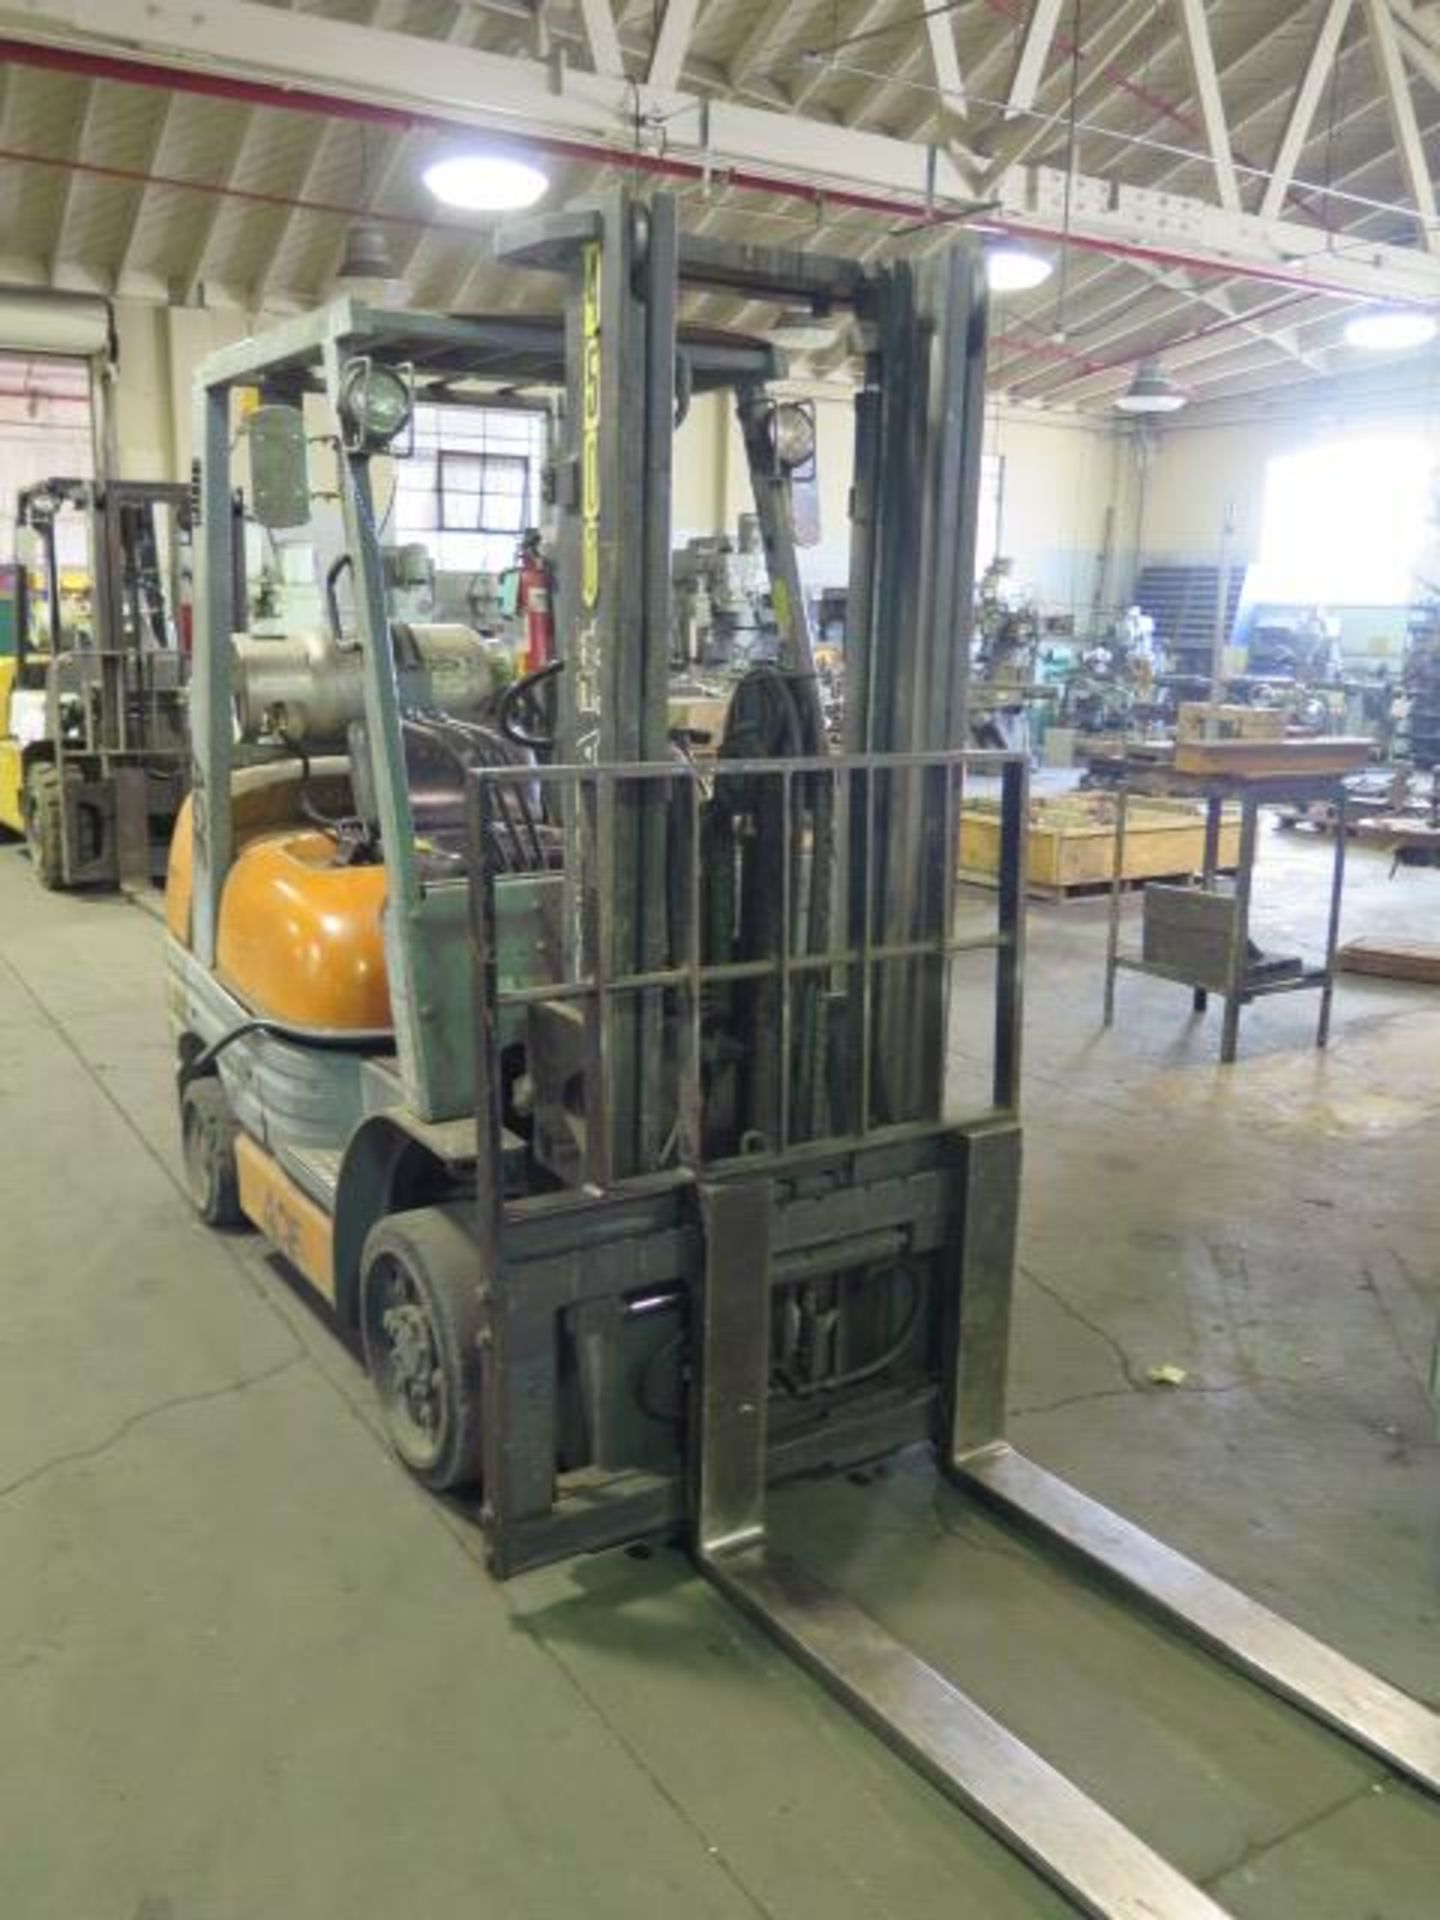 Toyota 42-6FGCU30 6000 Lb Cap LPG Forklift s/n 60775 w/ 2-Stage Mast, 132” Lift Height, SOLD AS IS - Image 2 of 15